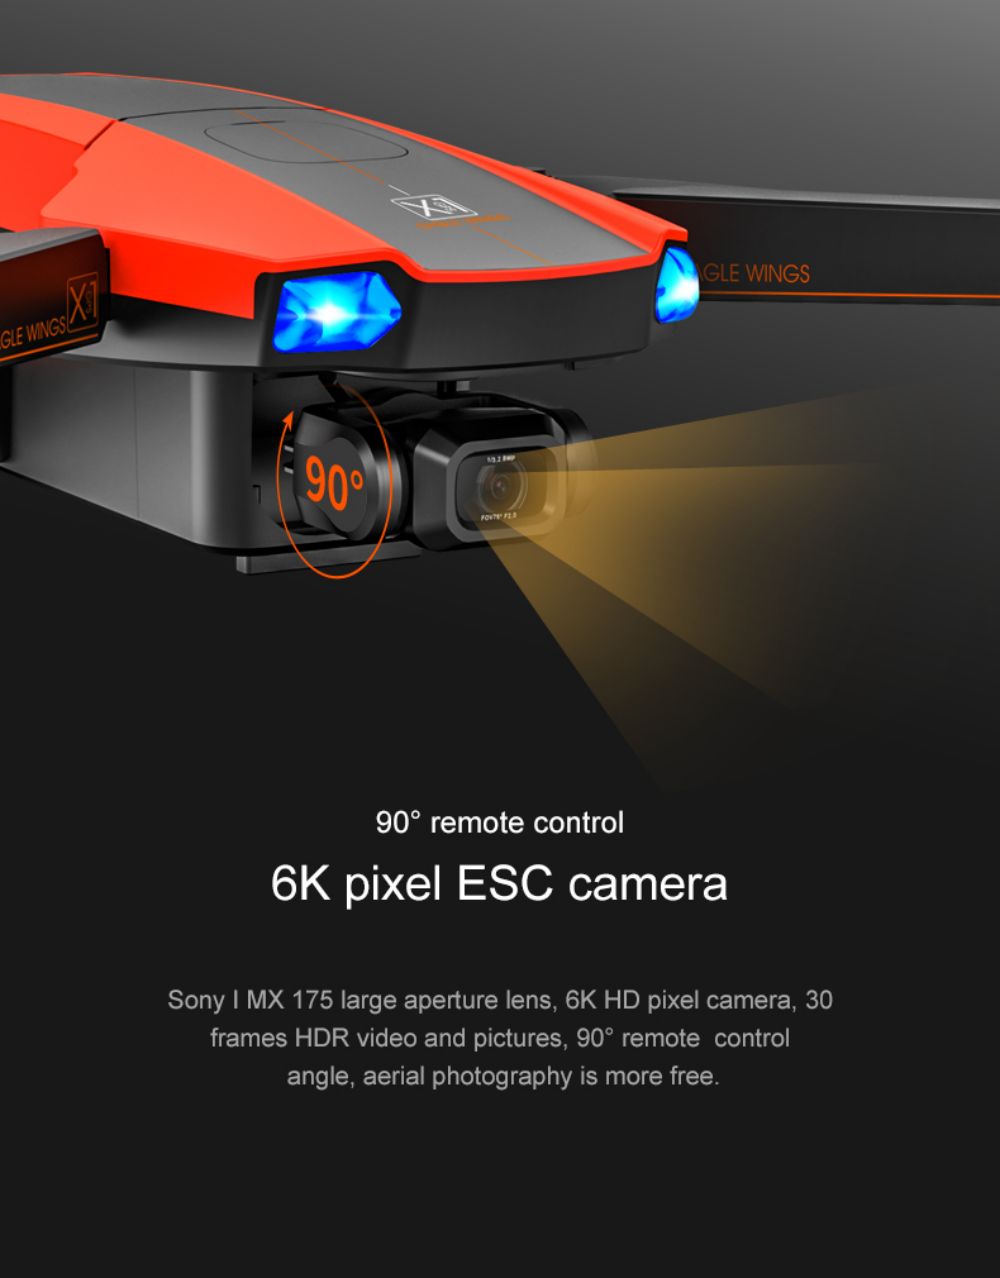 JJRC X22 GPS 5G WiFi FPV RC Drone 1080P HD Camera Obstacle Avoidance 3-Axis Gimbal Black & Orange 3 Batteries